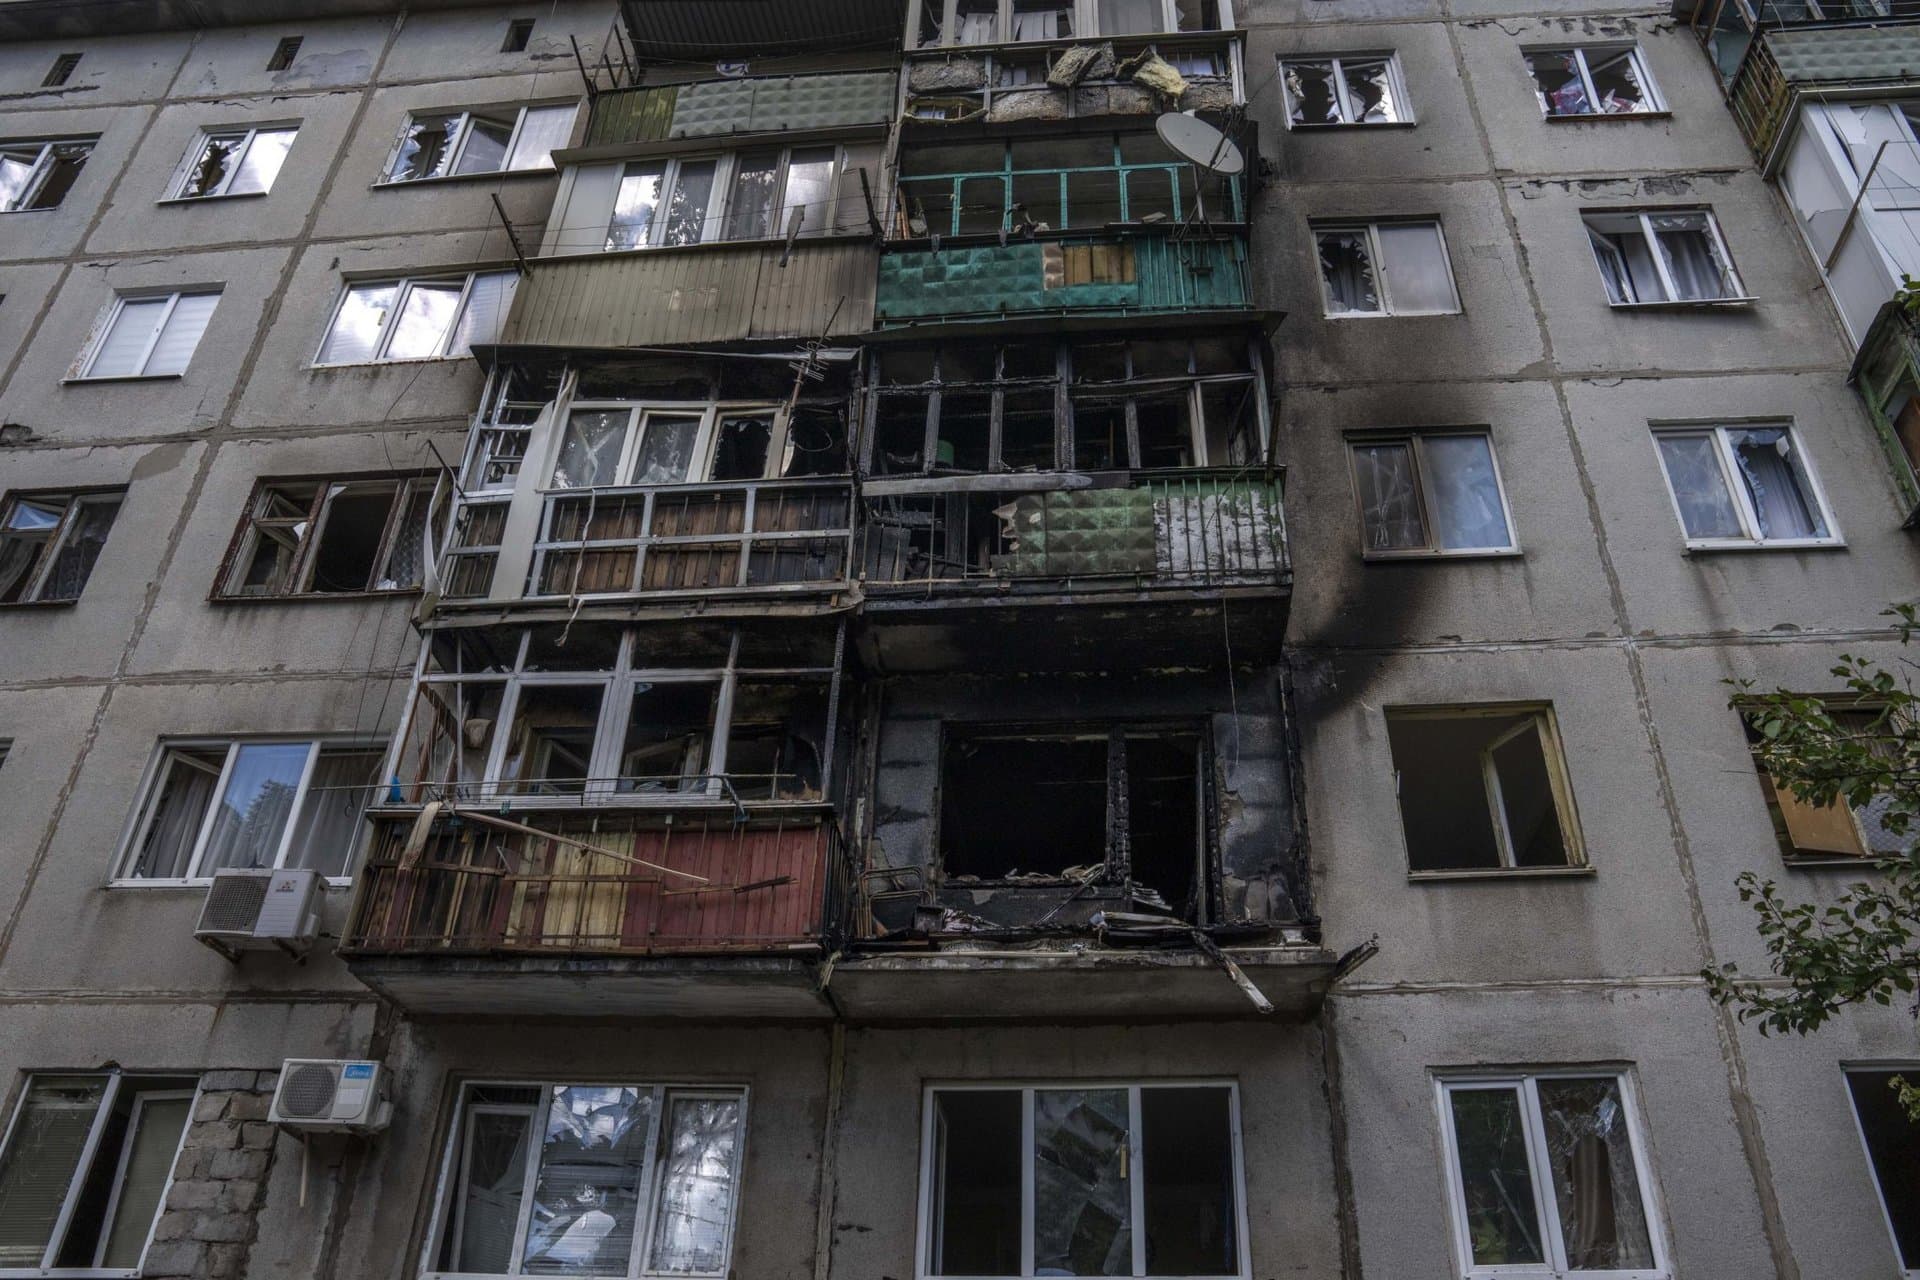 A five-story residential building damaged from a rocket attack on a residential area, in Kramatorsk